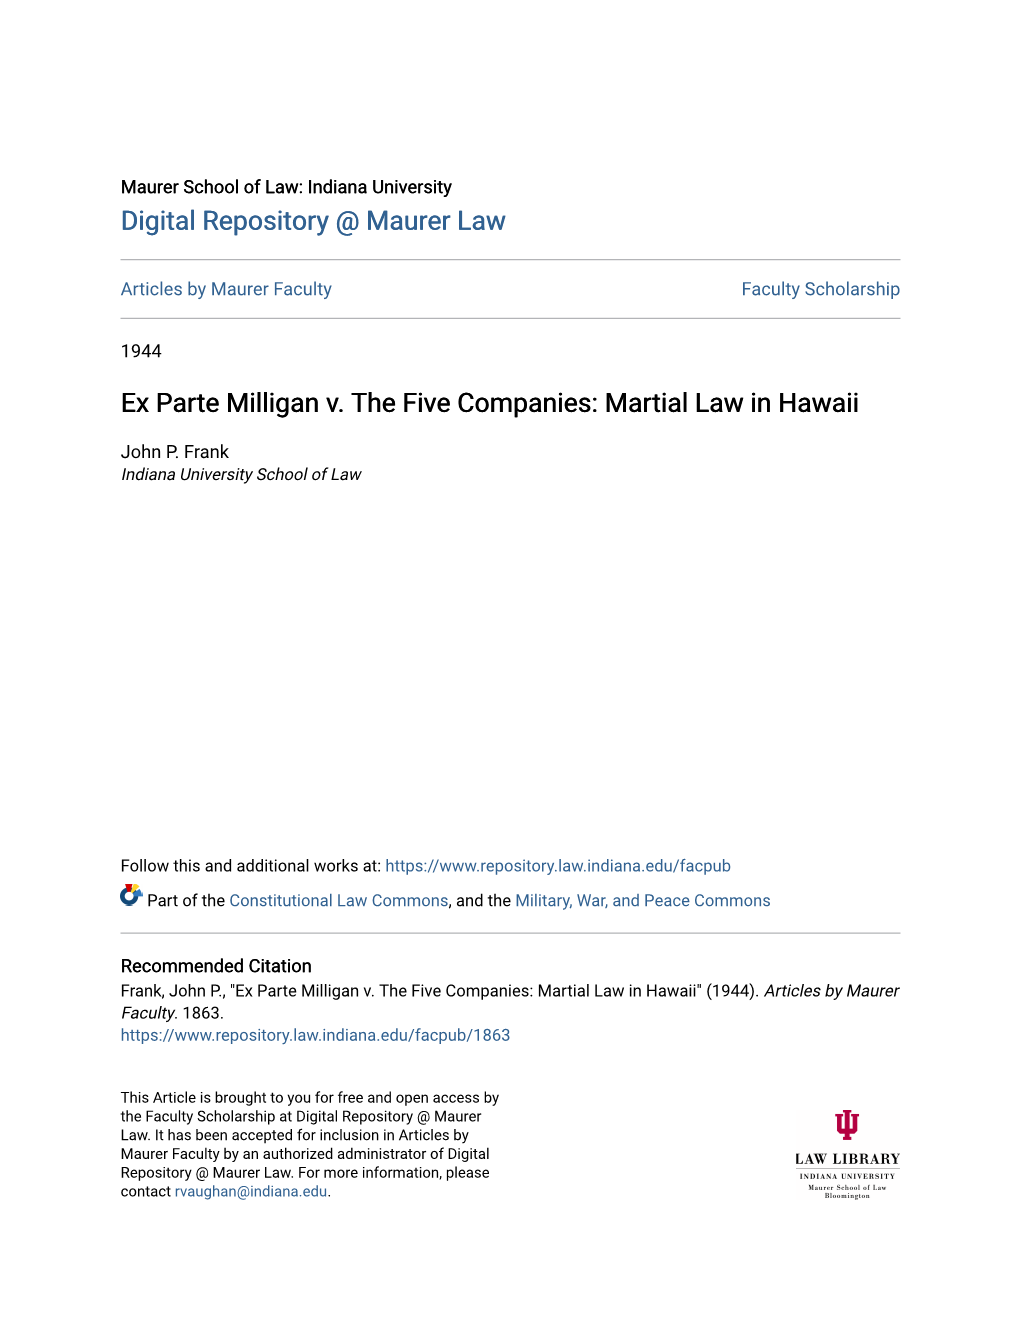 Ex Parte Milligan V. the Five Companies: Martial Law in Hawaii